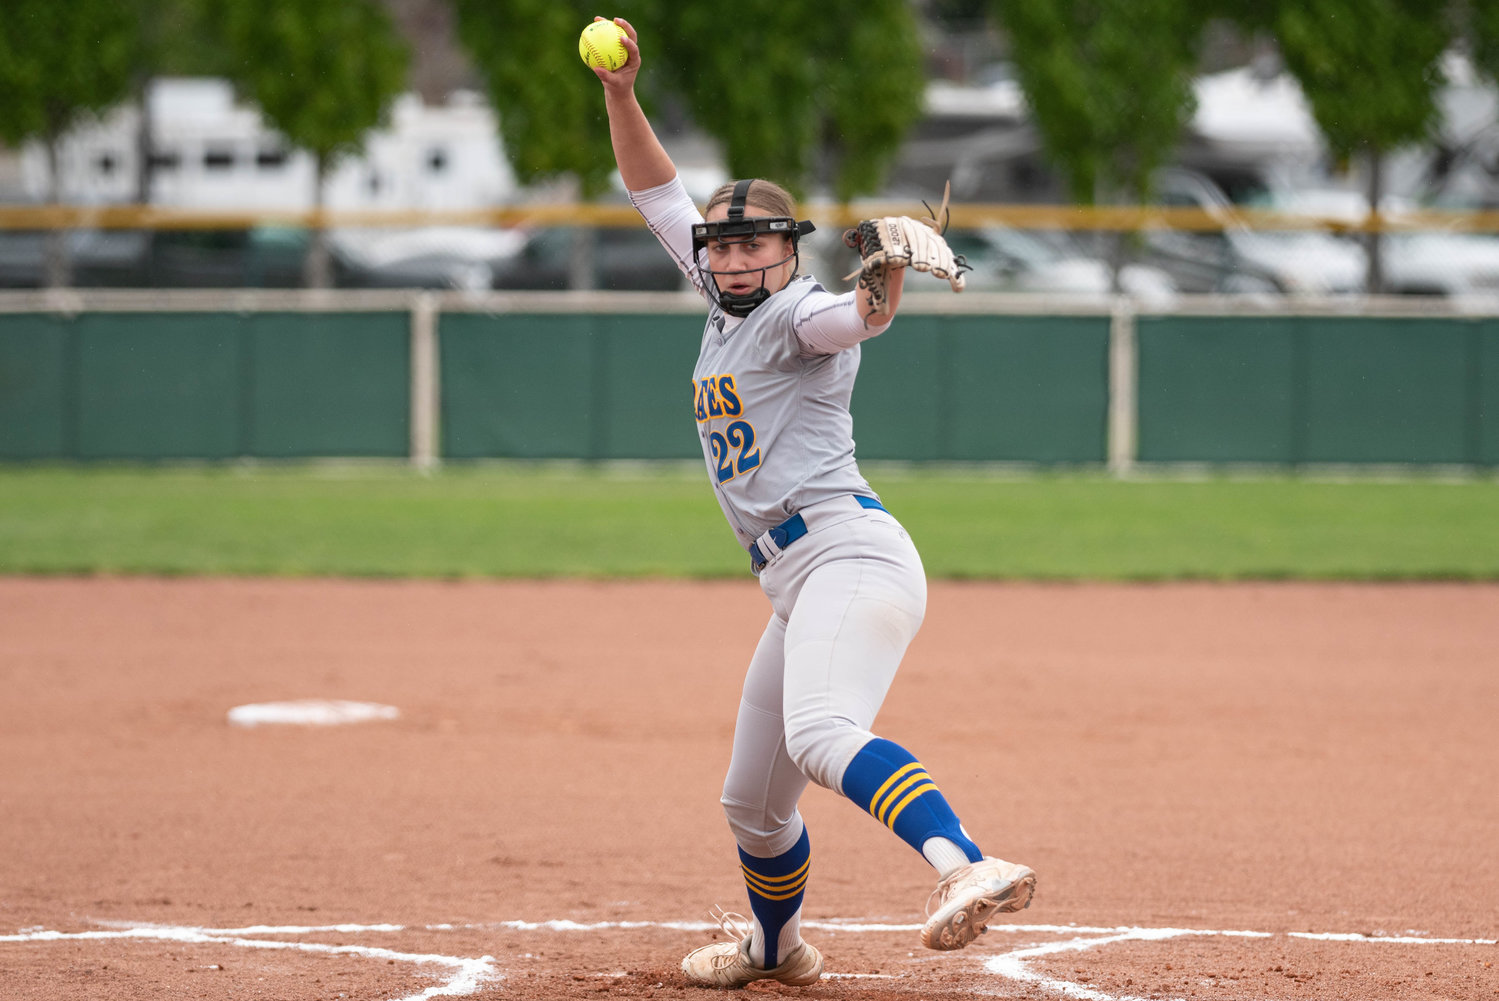 Adna pitcher Karlee VonMoos winds up to deliver a pitch against PWV in the 2B state title game at Yakima Gateway Sports Complex May 28.